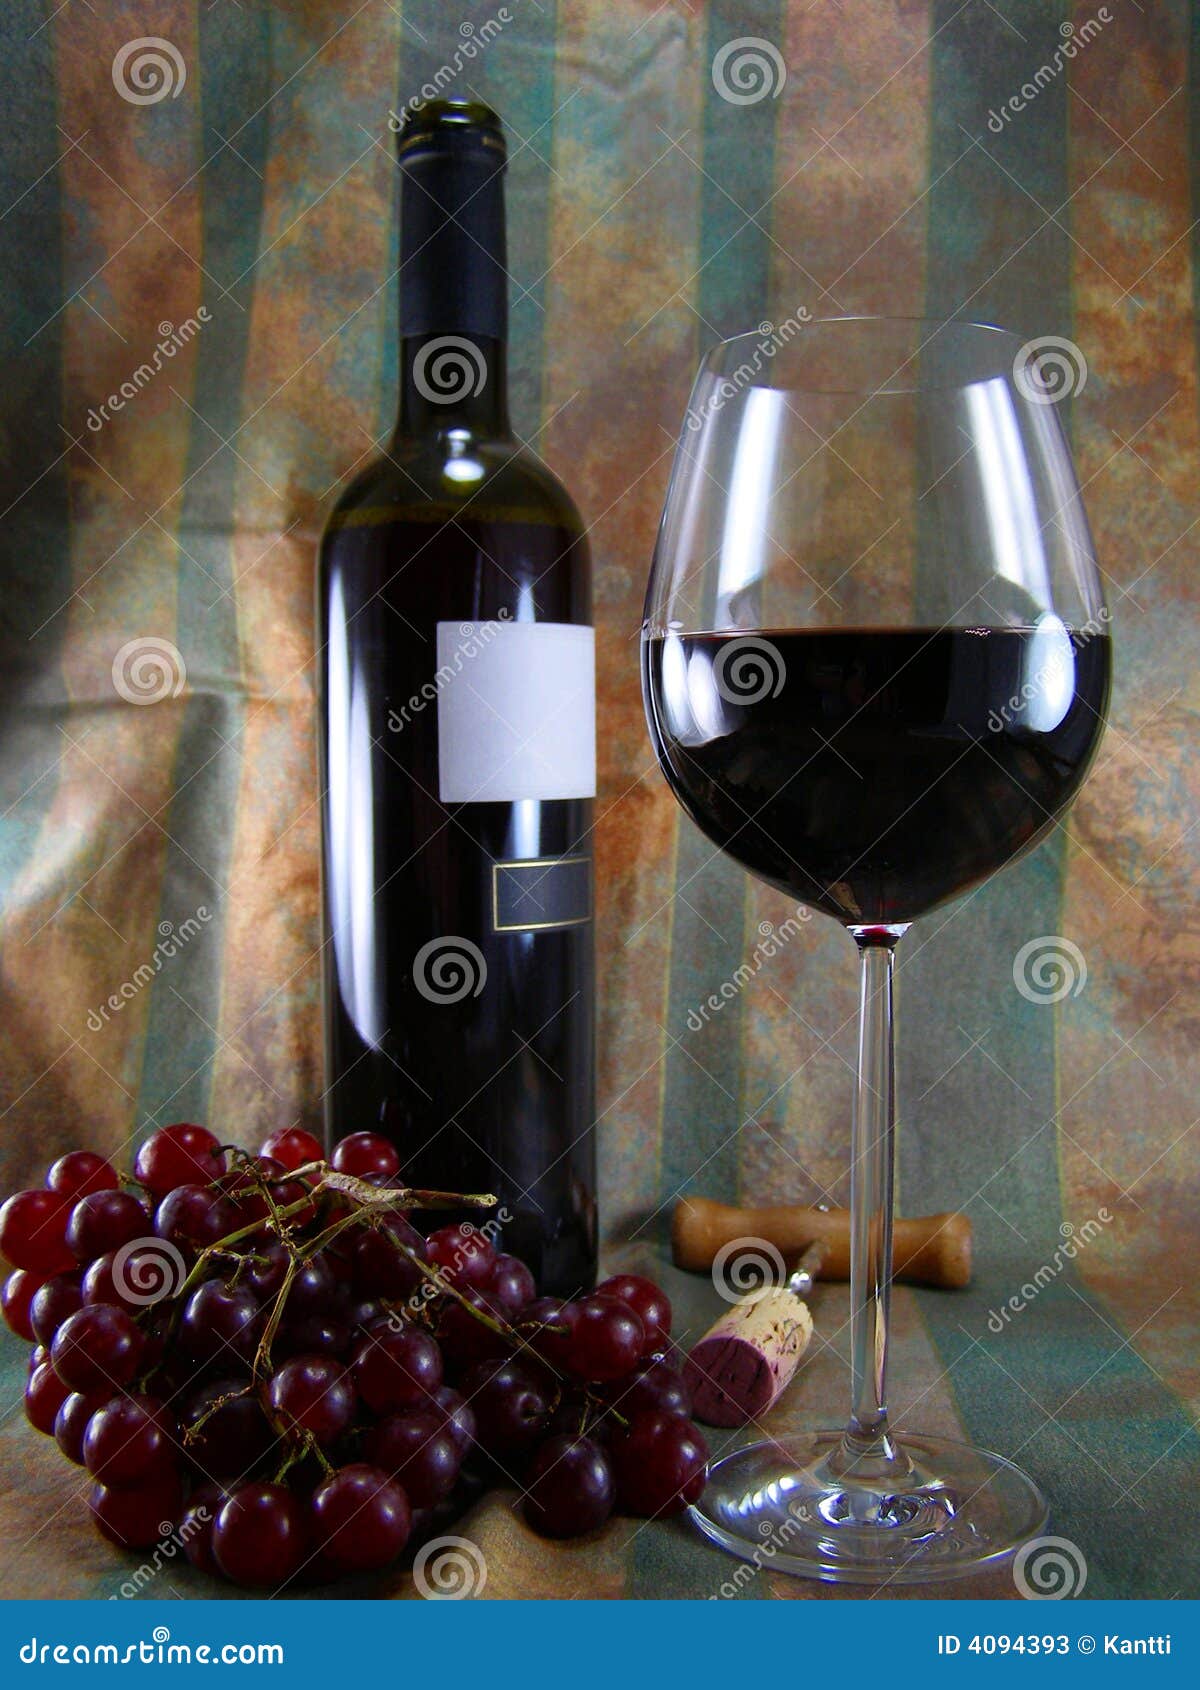 Wine, Bottle and Grapes stock image. Image of label, arrangement - 4094393